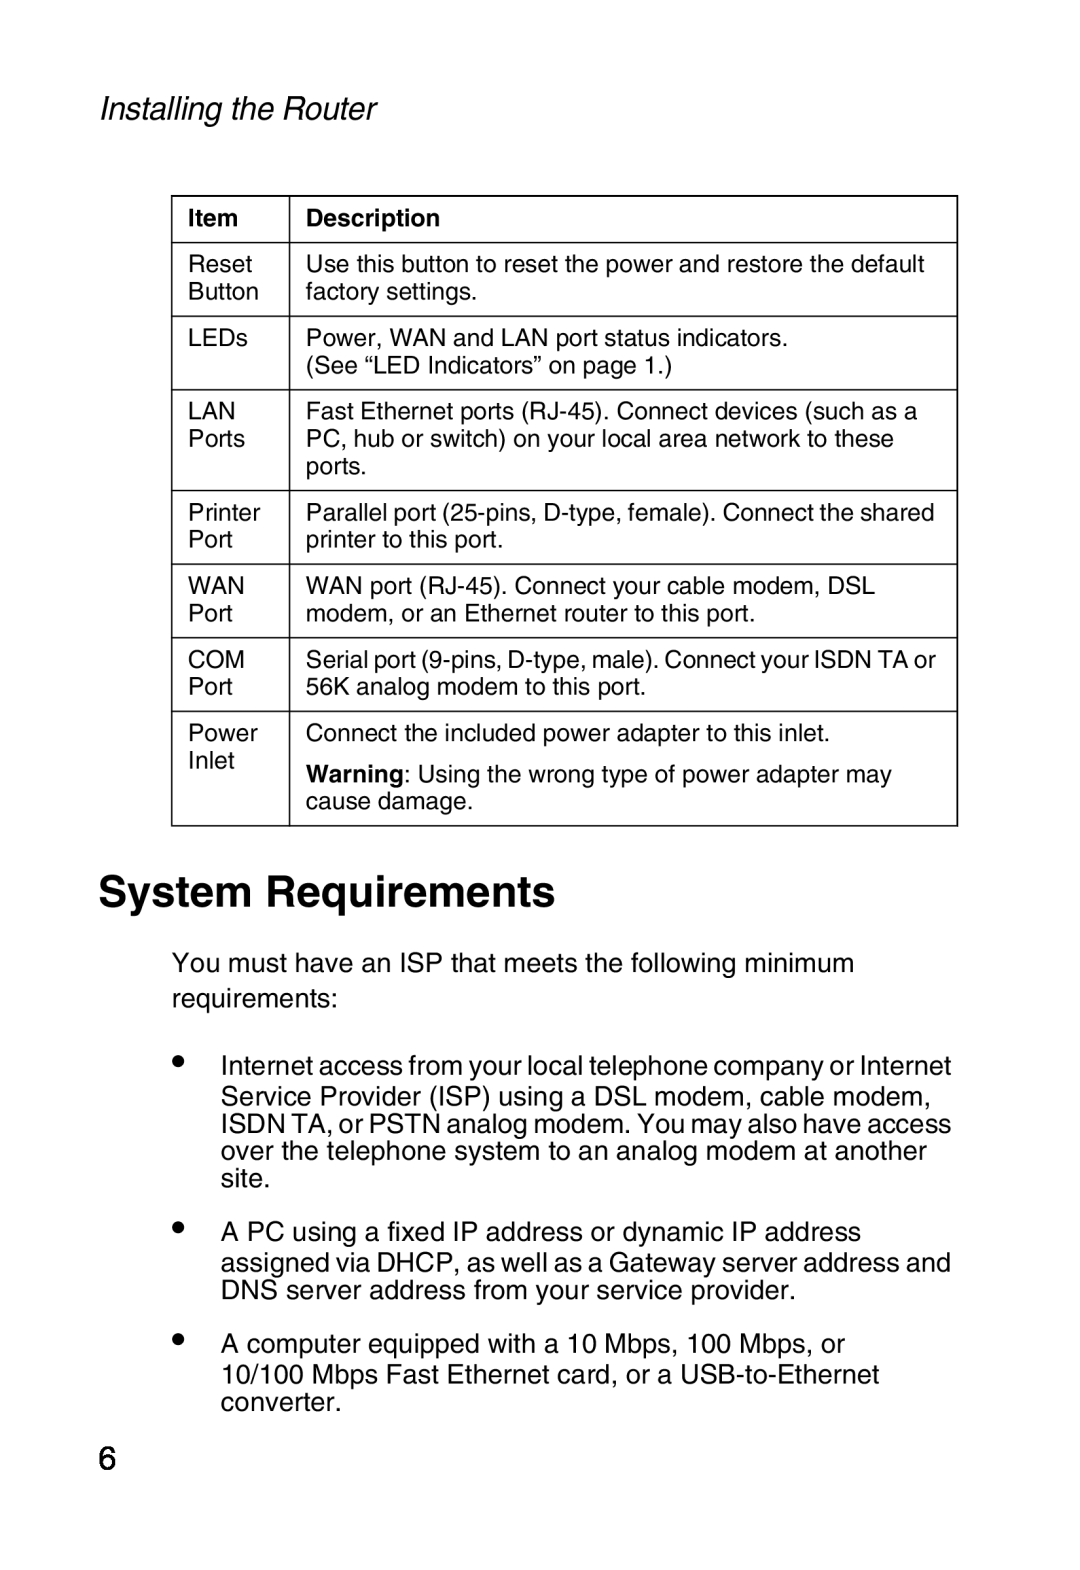 Sharp SMC7004ABR, S M C 7 0 0 4 A B R manual System Requirements, Installing the Router 